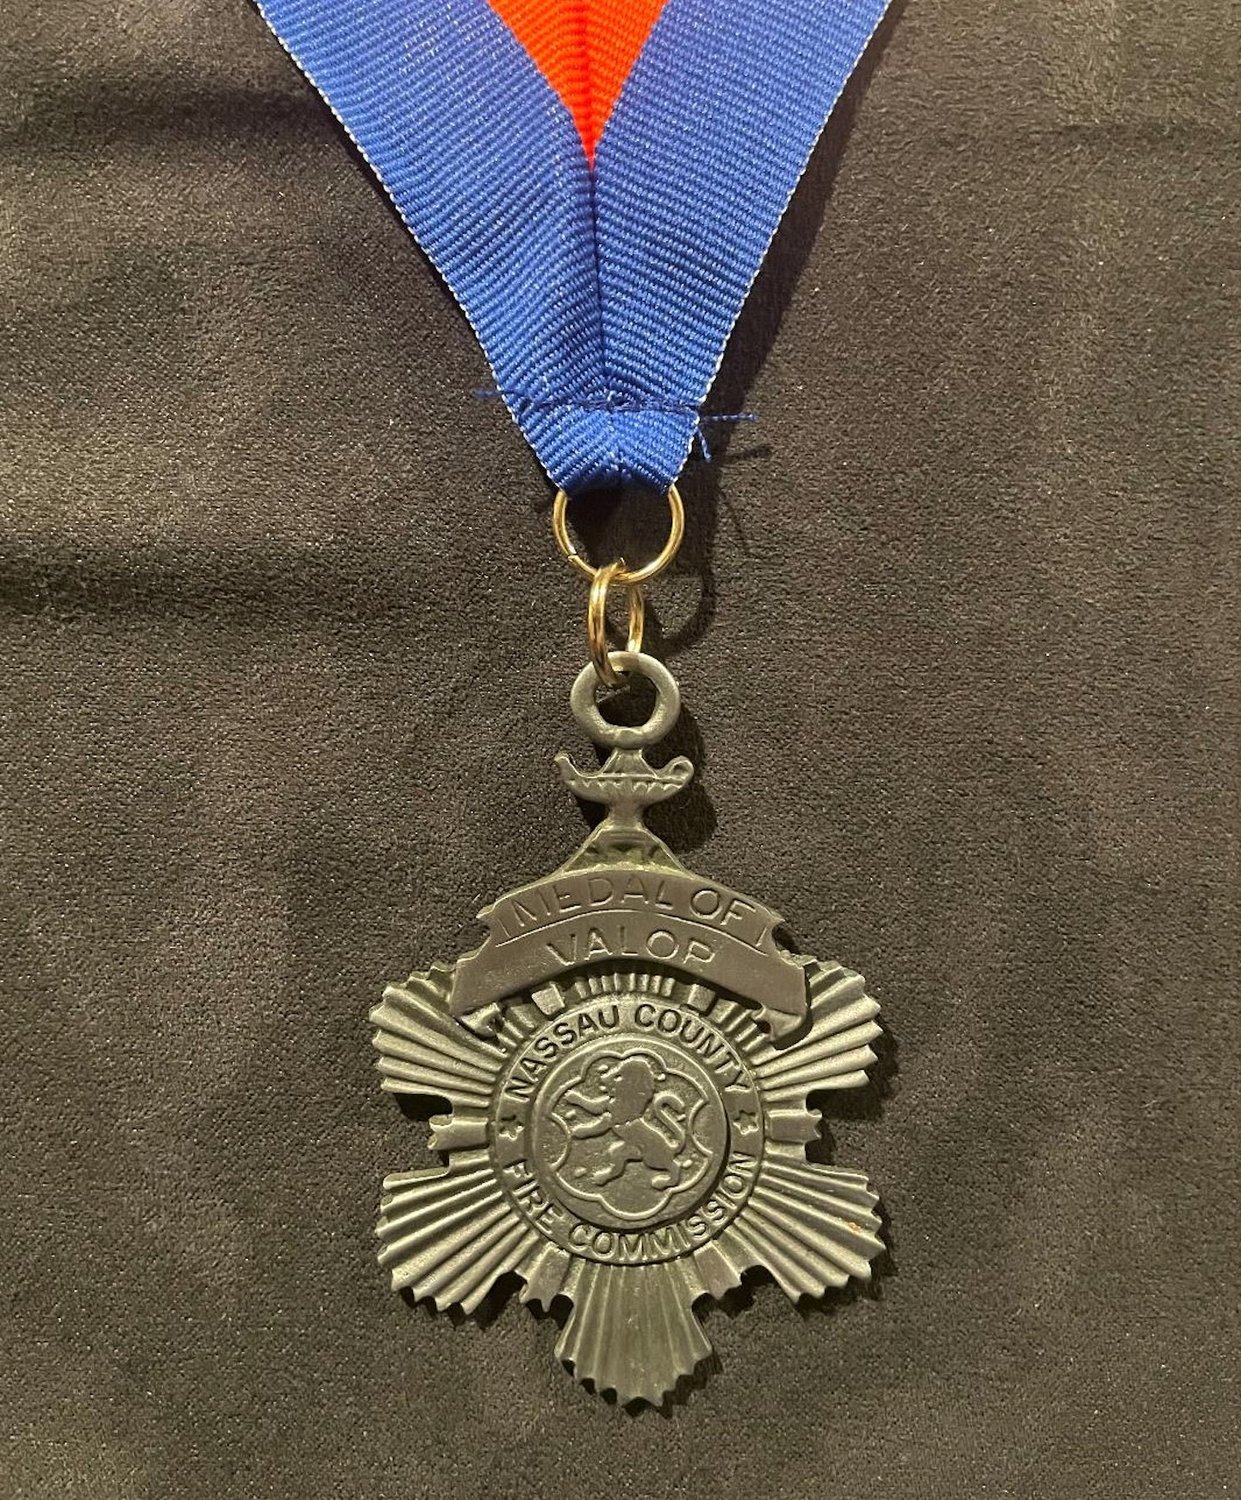 One of the medals the LFD earned  at left.